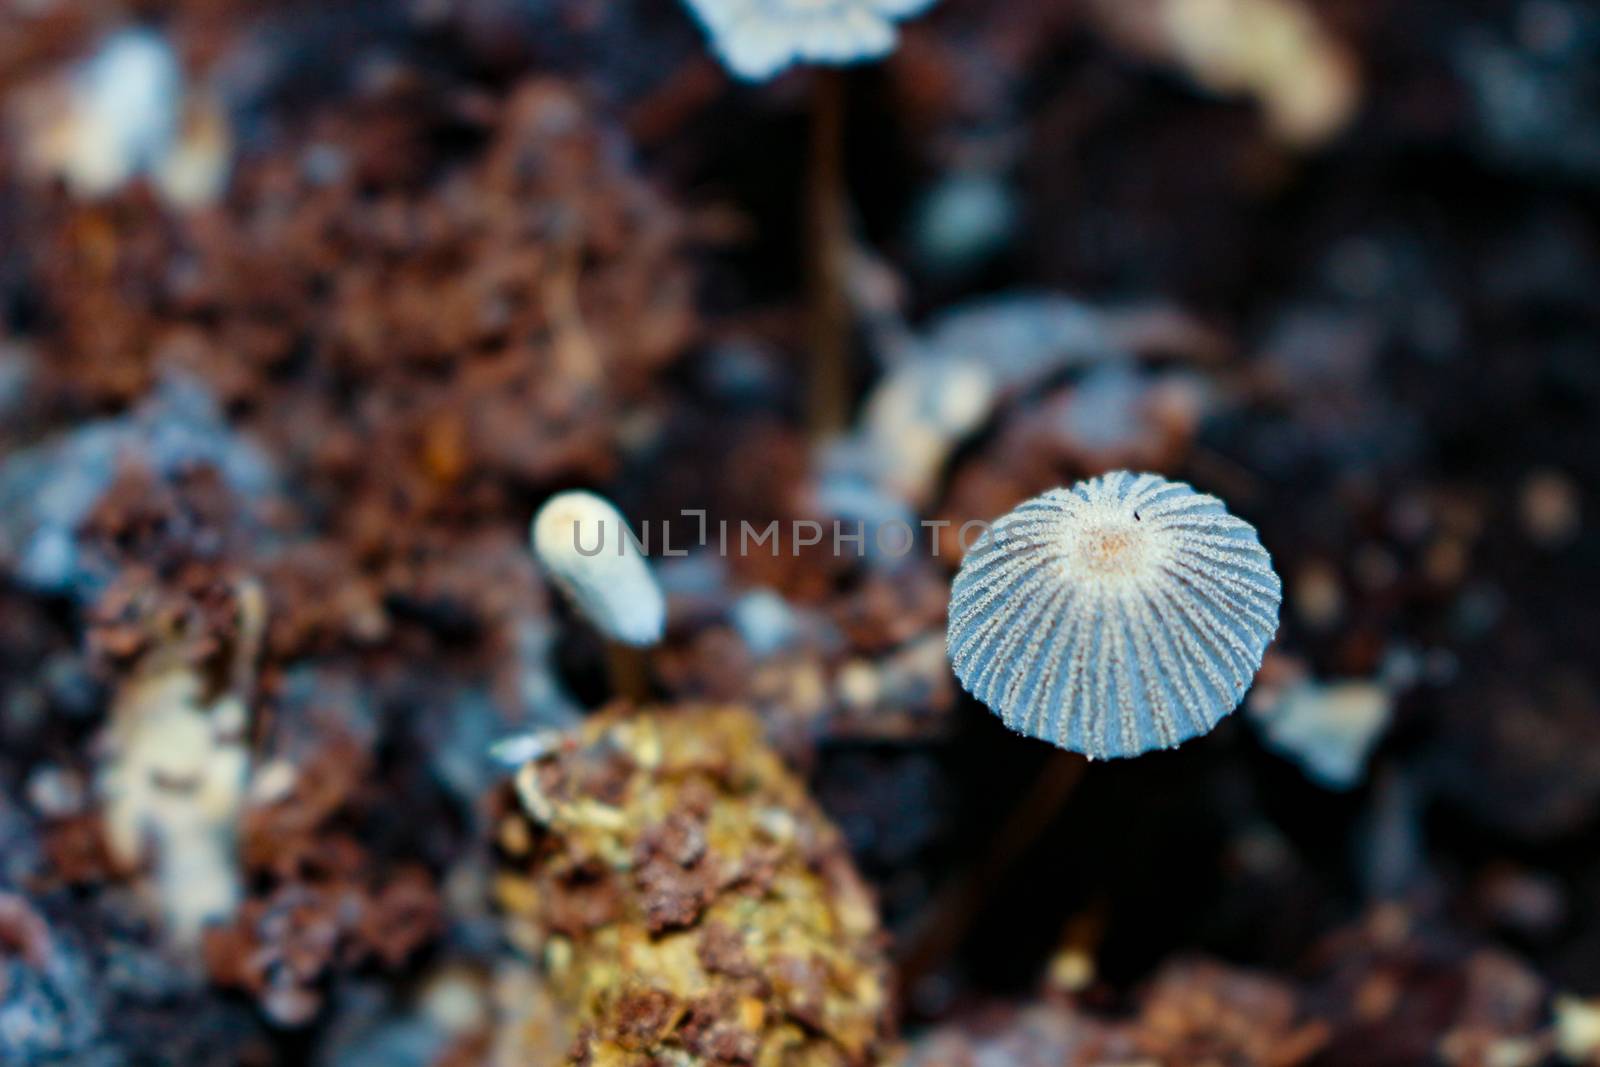 parasola auricoma mushrooms in the compost bin where they help d by mynewturtle1